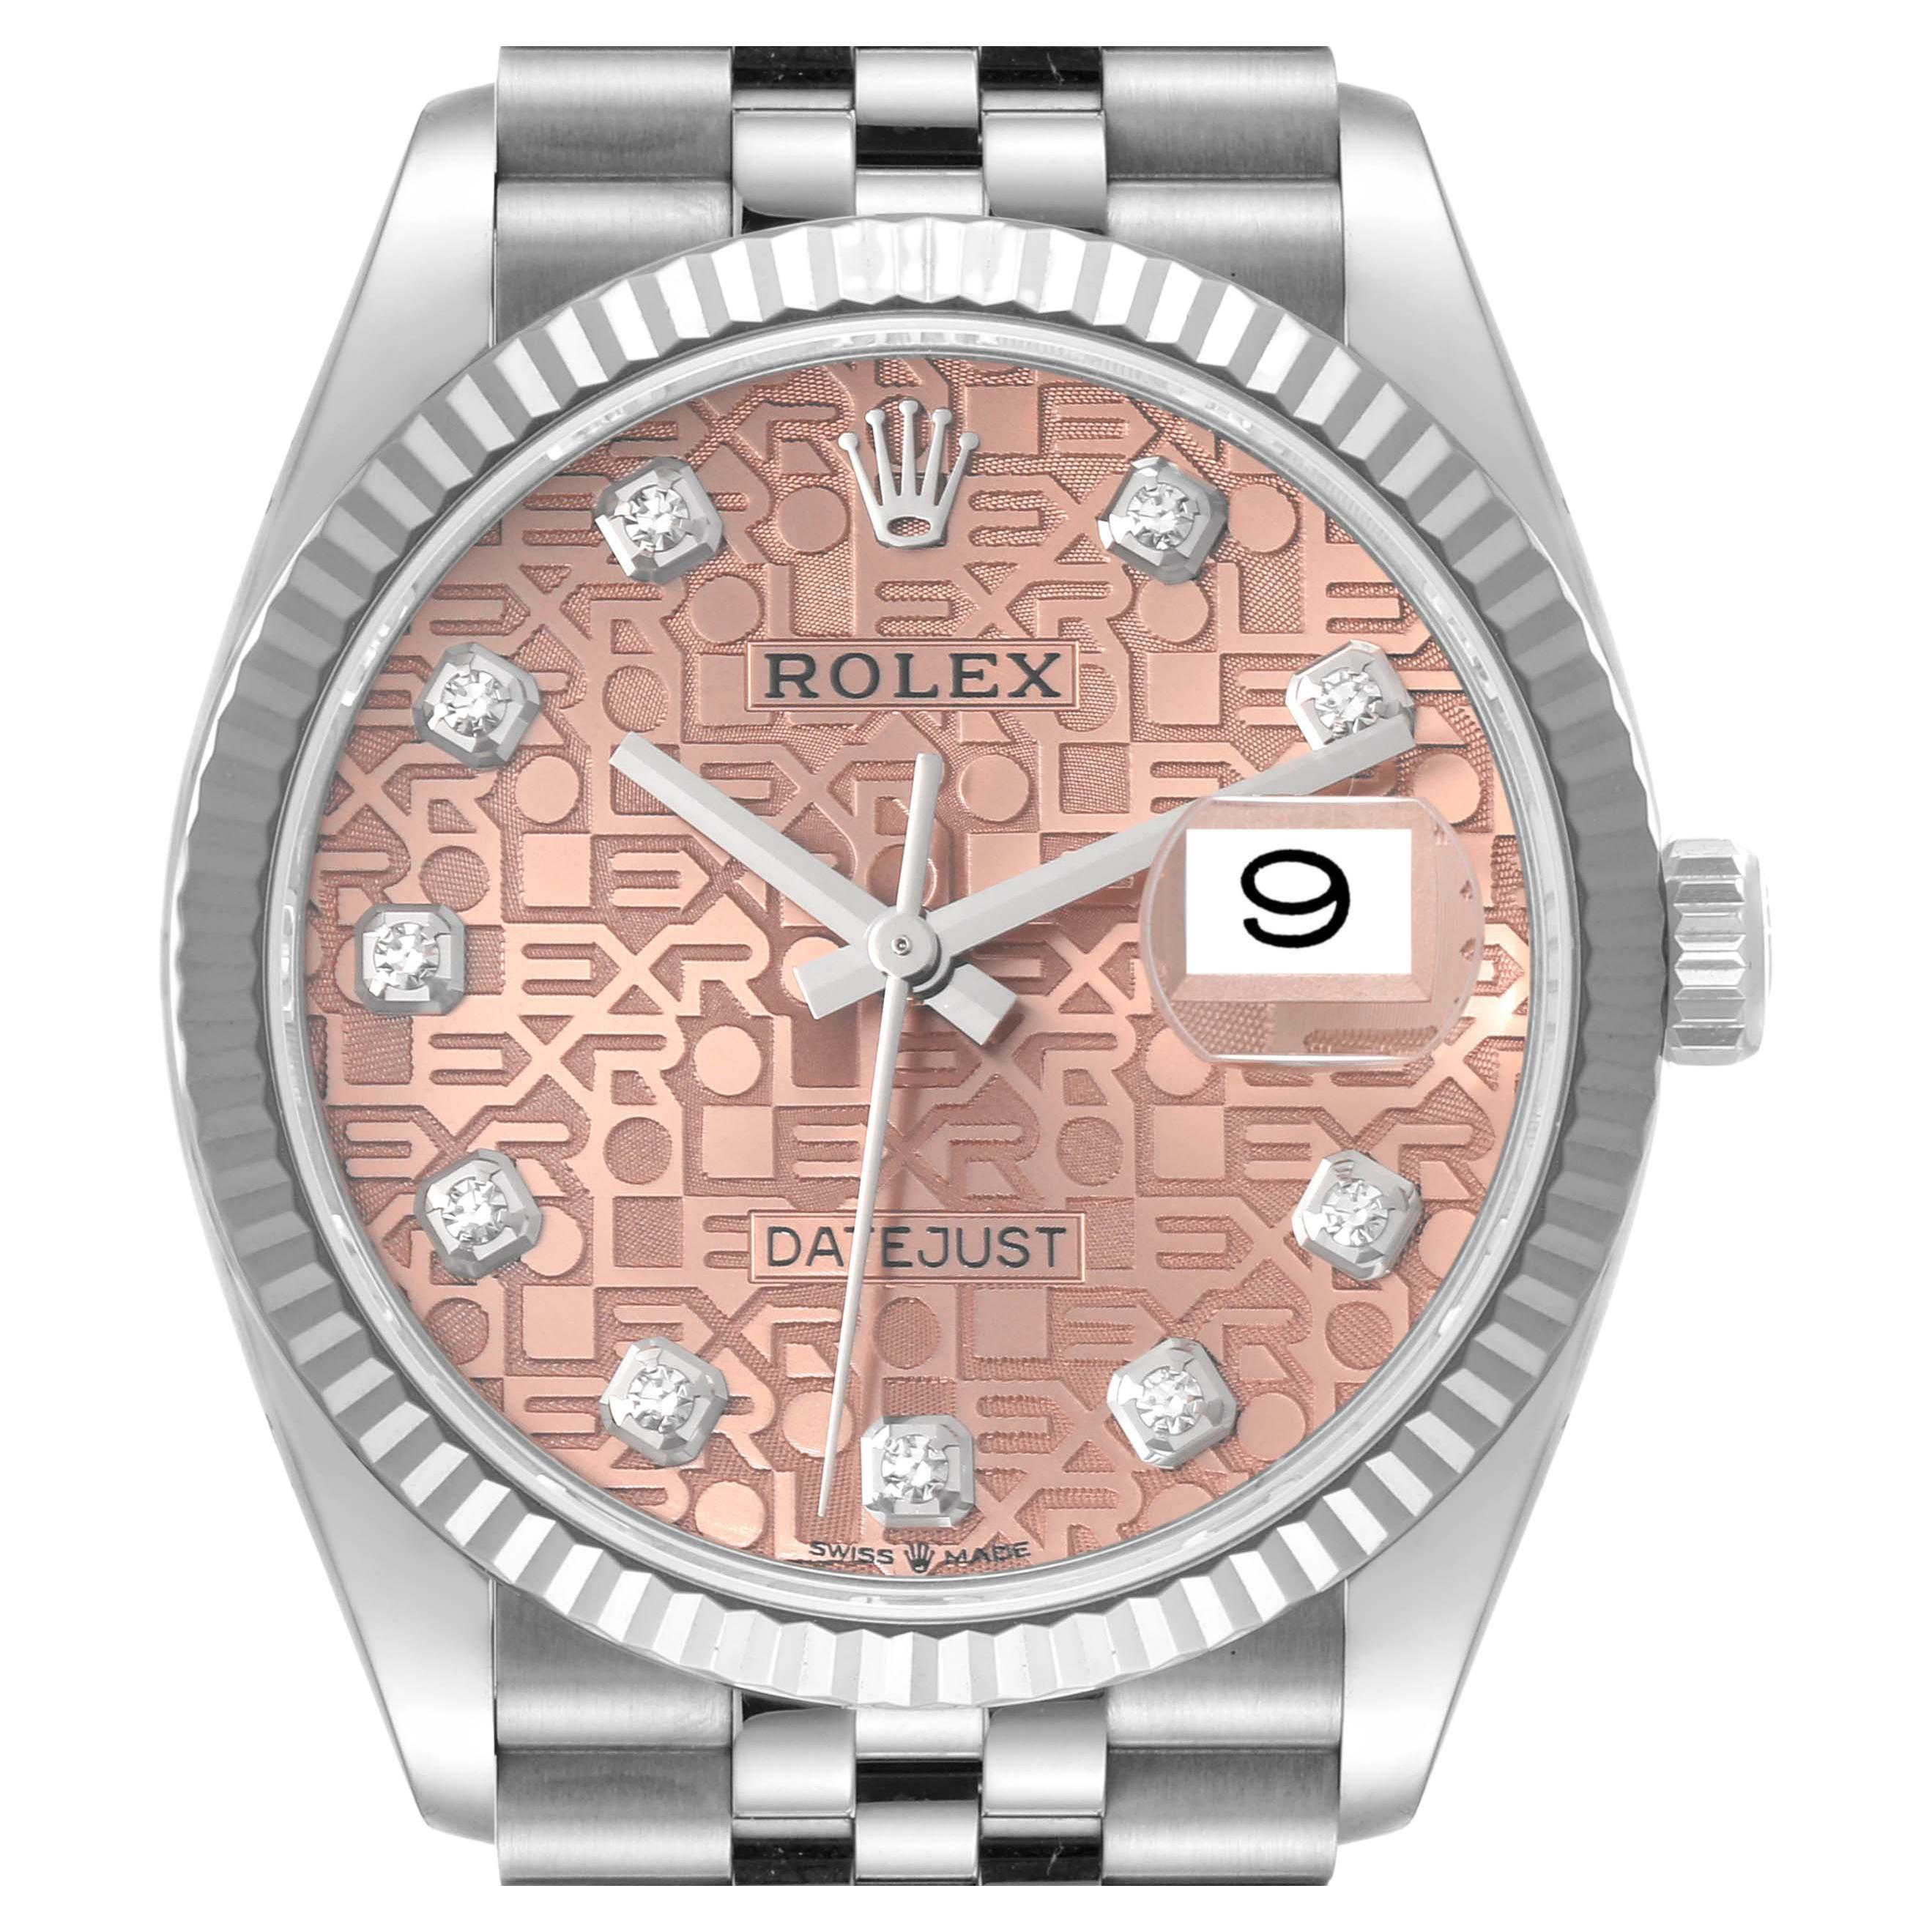 Rolex Datejust Steel White Gold Anniversary Diamond Dial Mens Watch 126234 For Sale